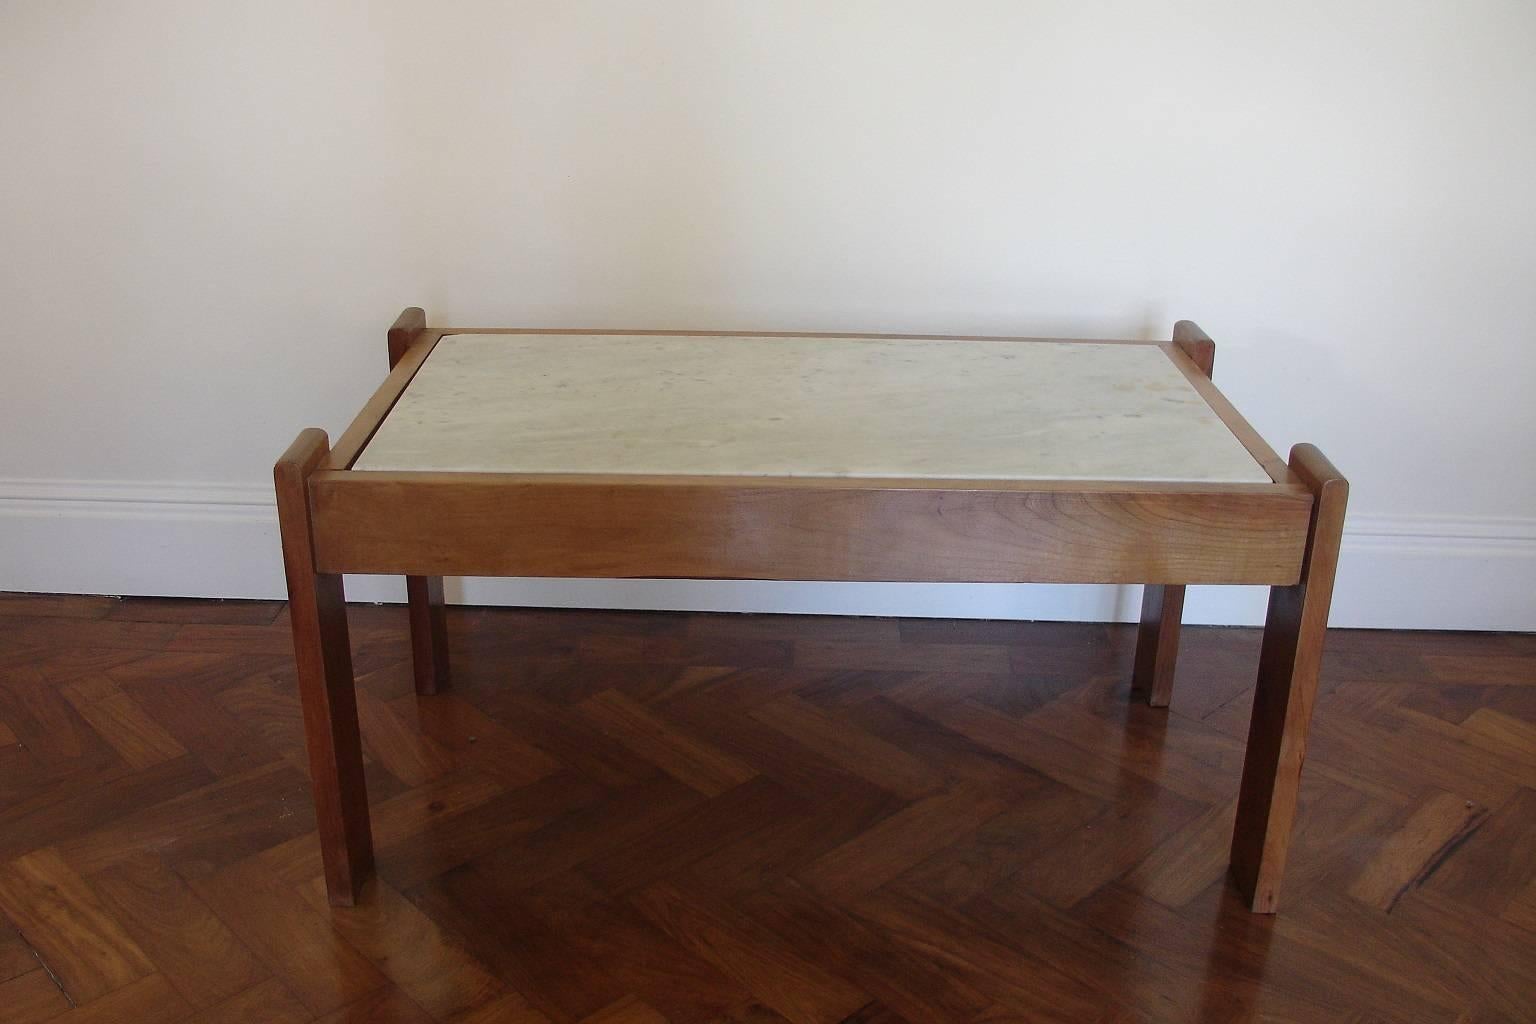 An elegant cherrywood Carrara marble coffee/centre table with bronze details. The marble is original and has some marks on the top and also a chip in the corner. It is easily replaceable. An unrestrained design, in the manner of Jacques Adnet.